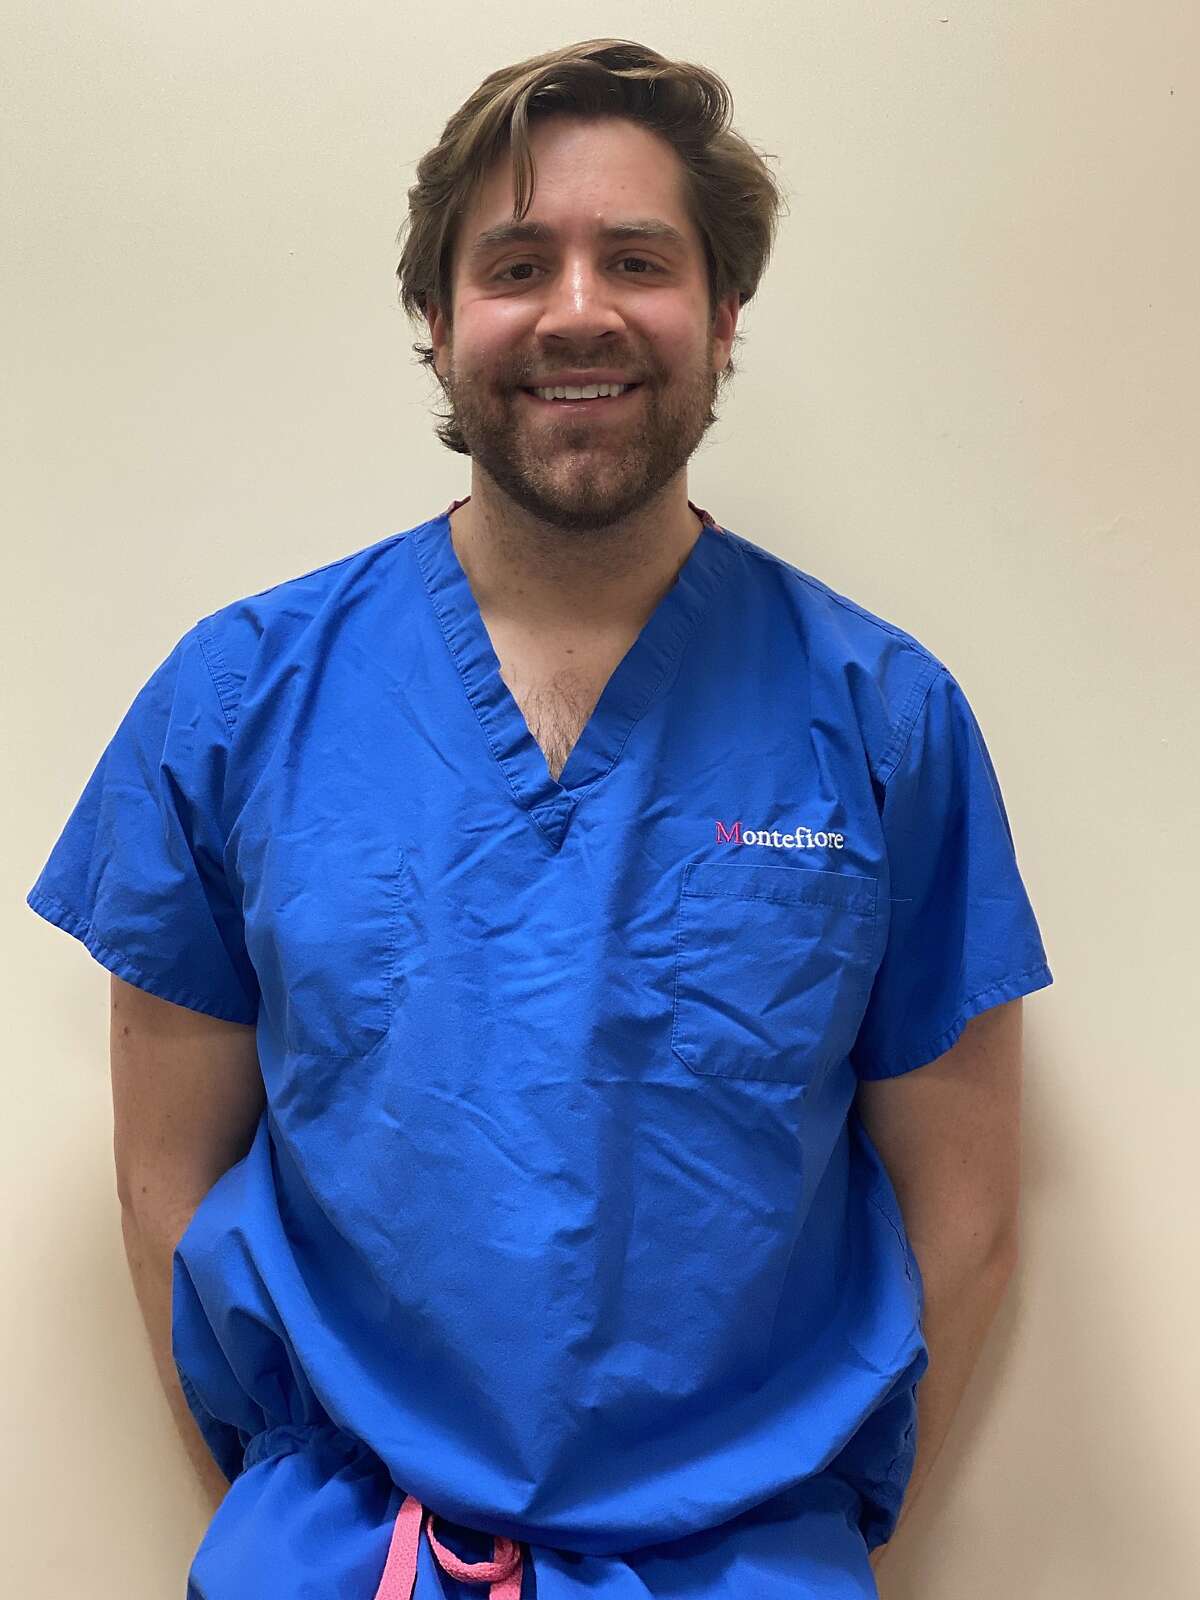 In the second year of his psychiatry residence, Ridgefielder Ryan Flanagan was temporarily moved to a medical floor to help treat COVID-19 patients at Montefiore Medical Center in the Bronx.